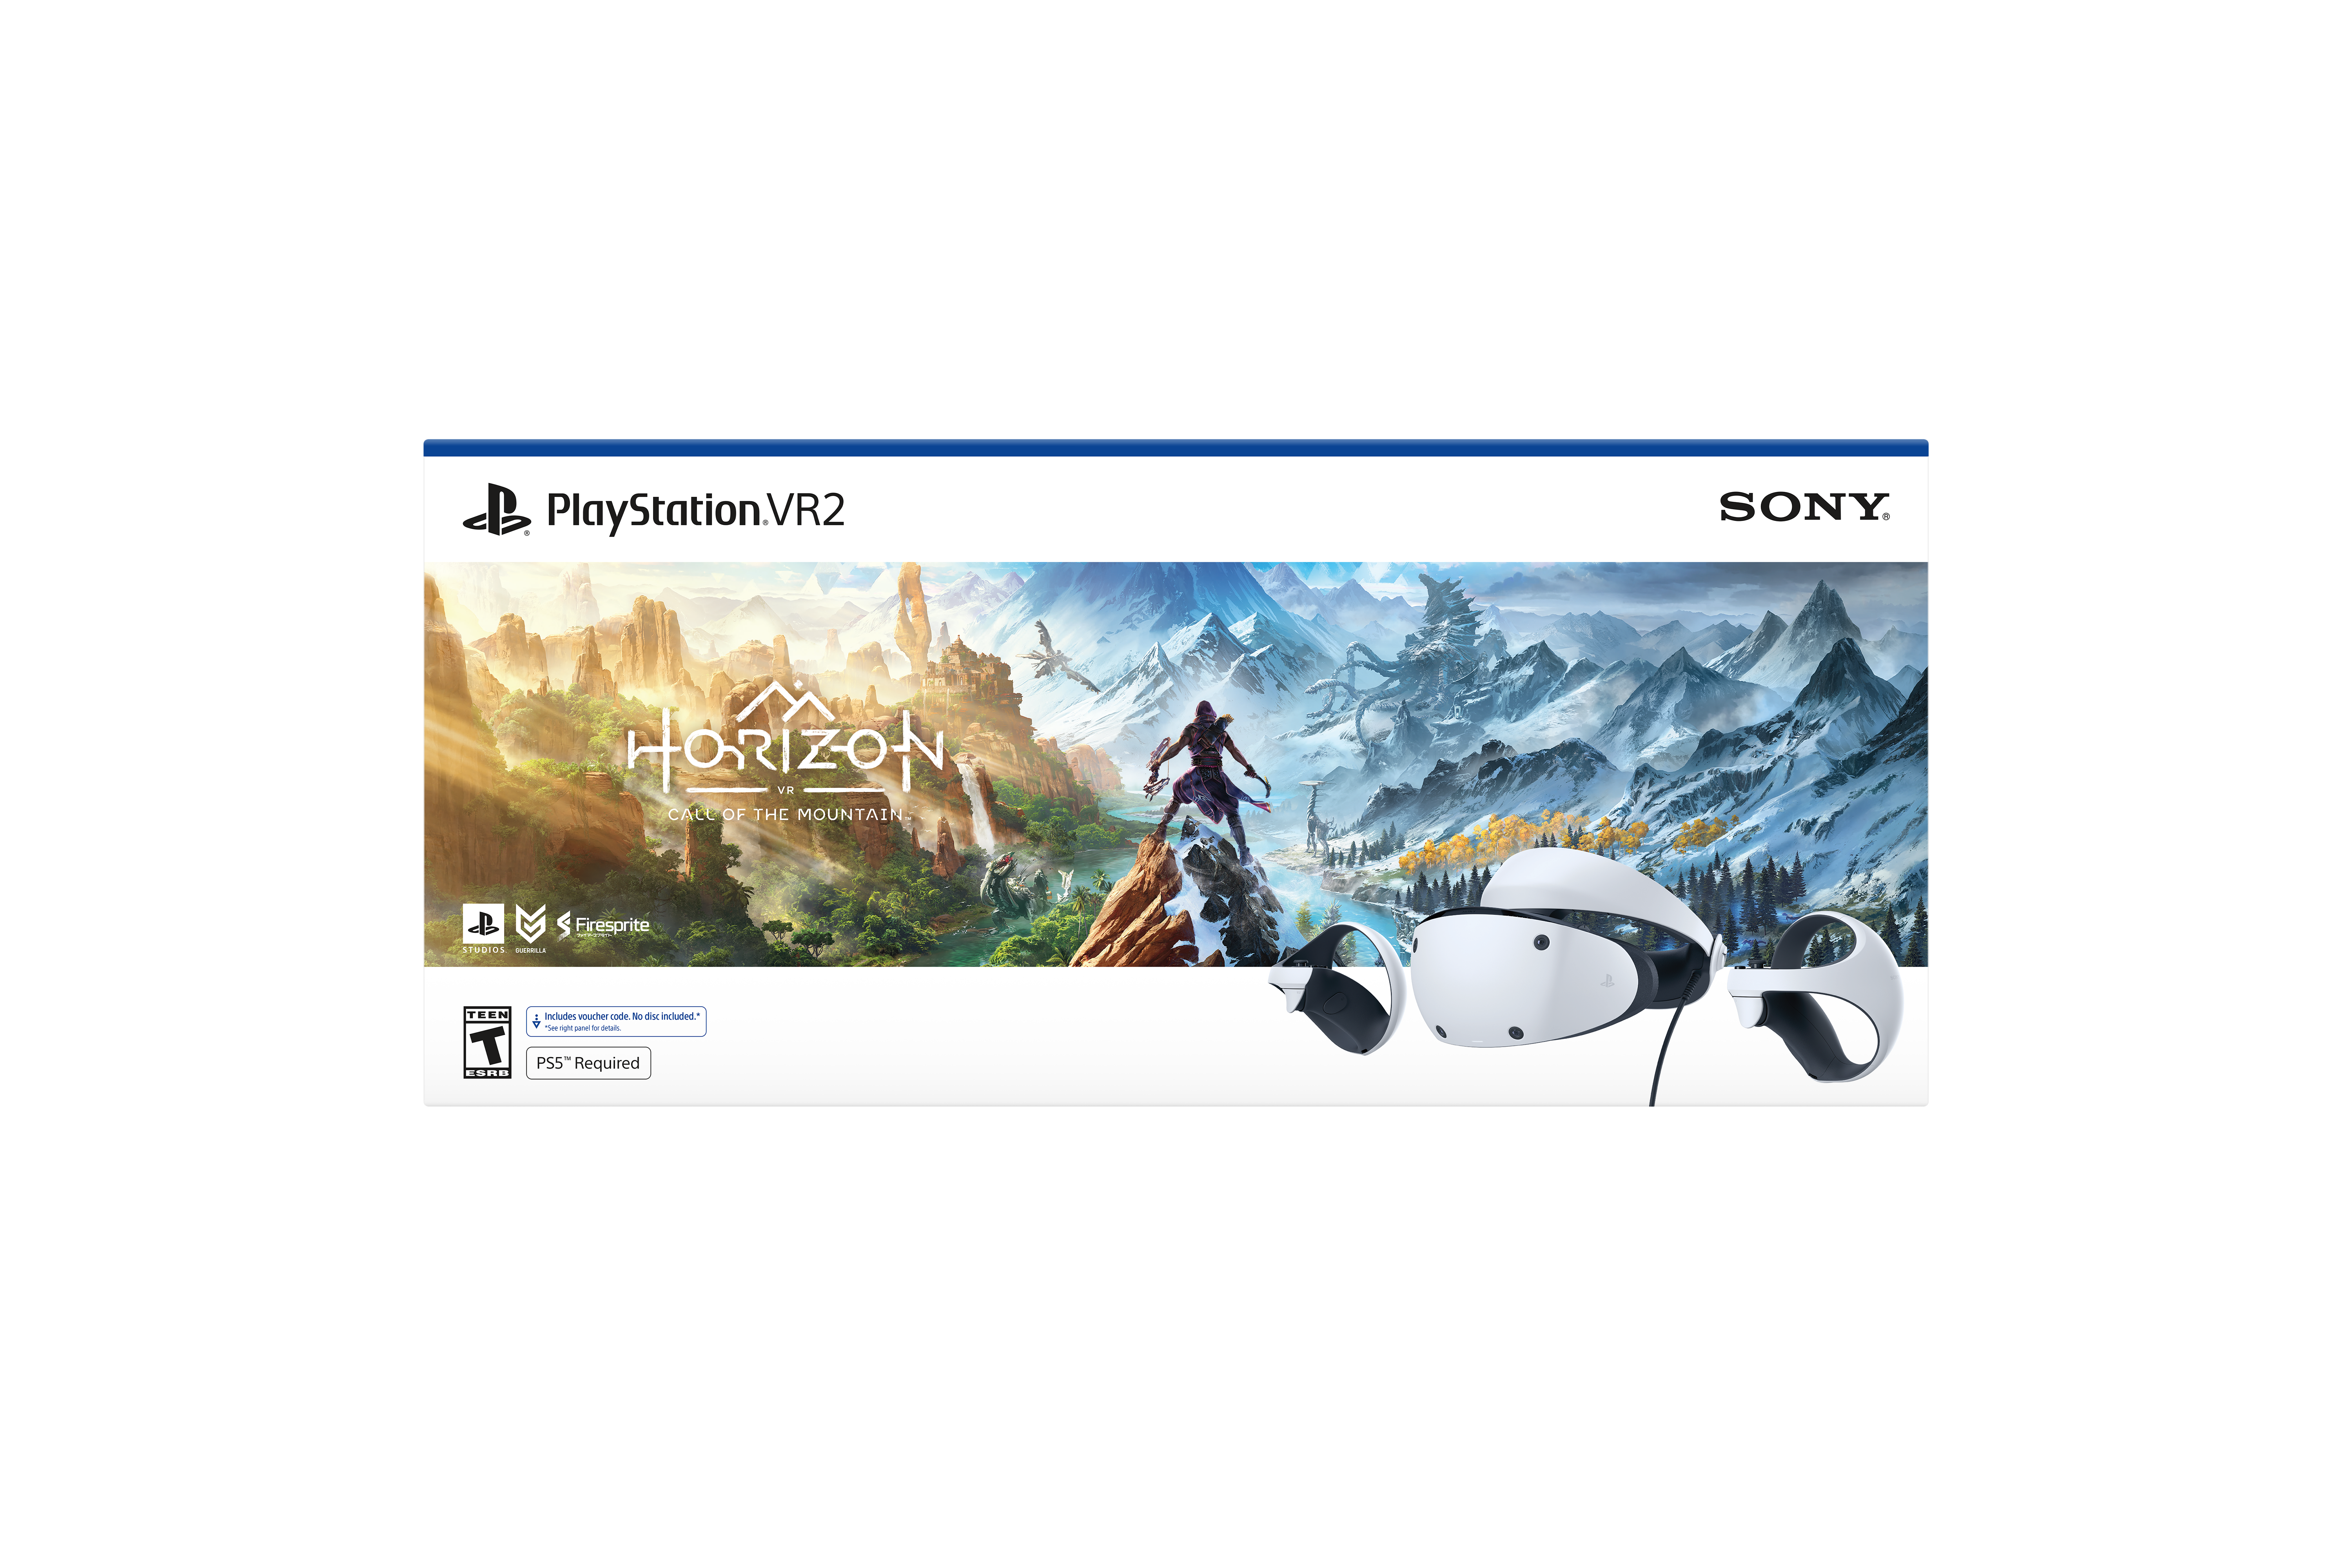 PlayStation VR2 and Horizon Call of the Mountain have me excited